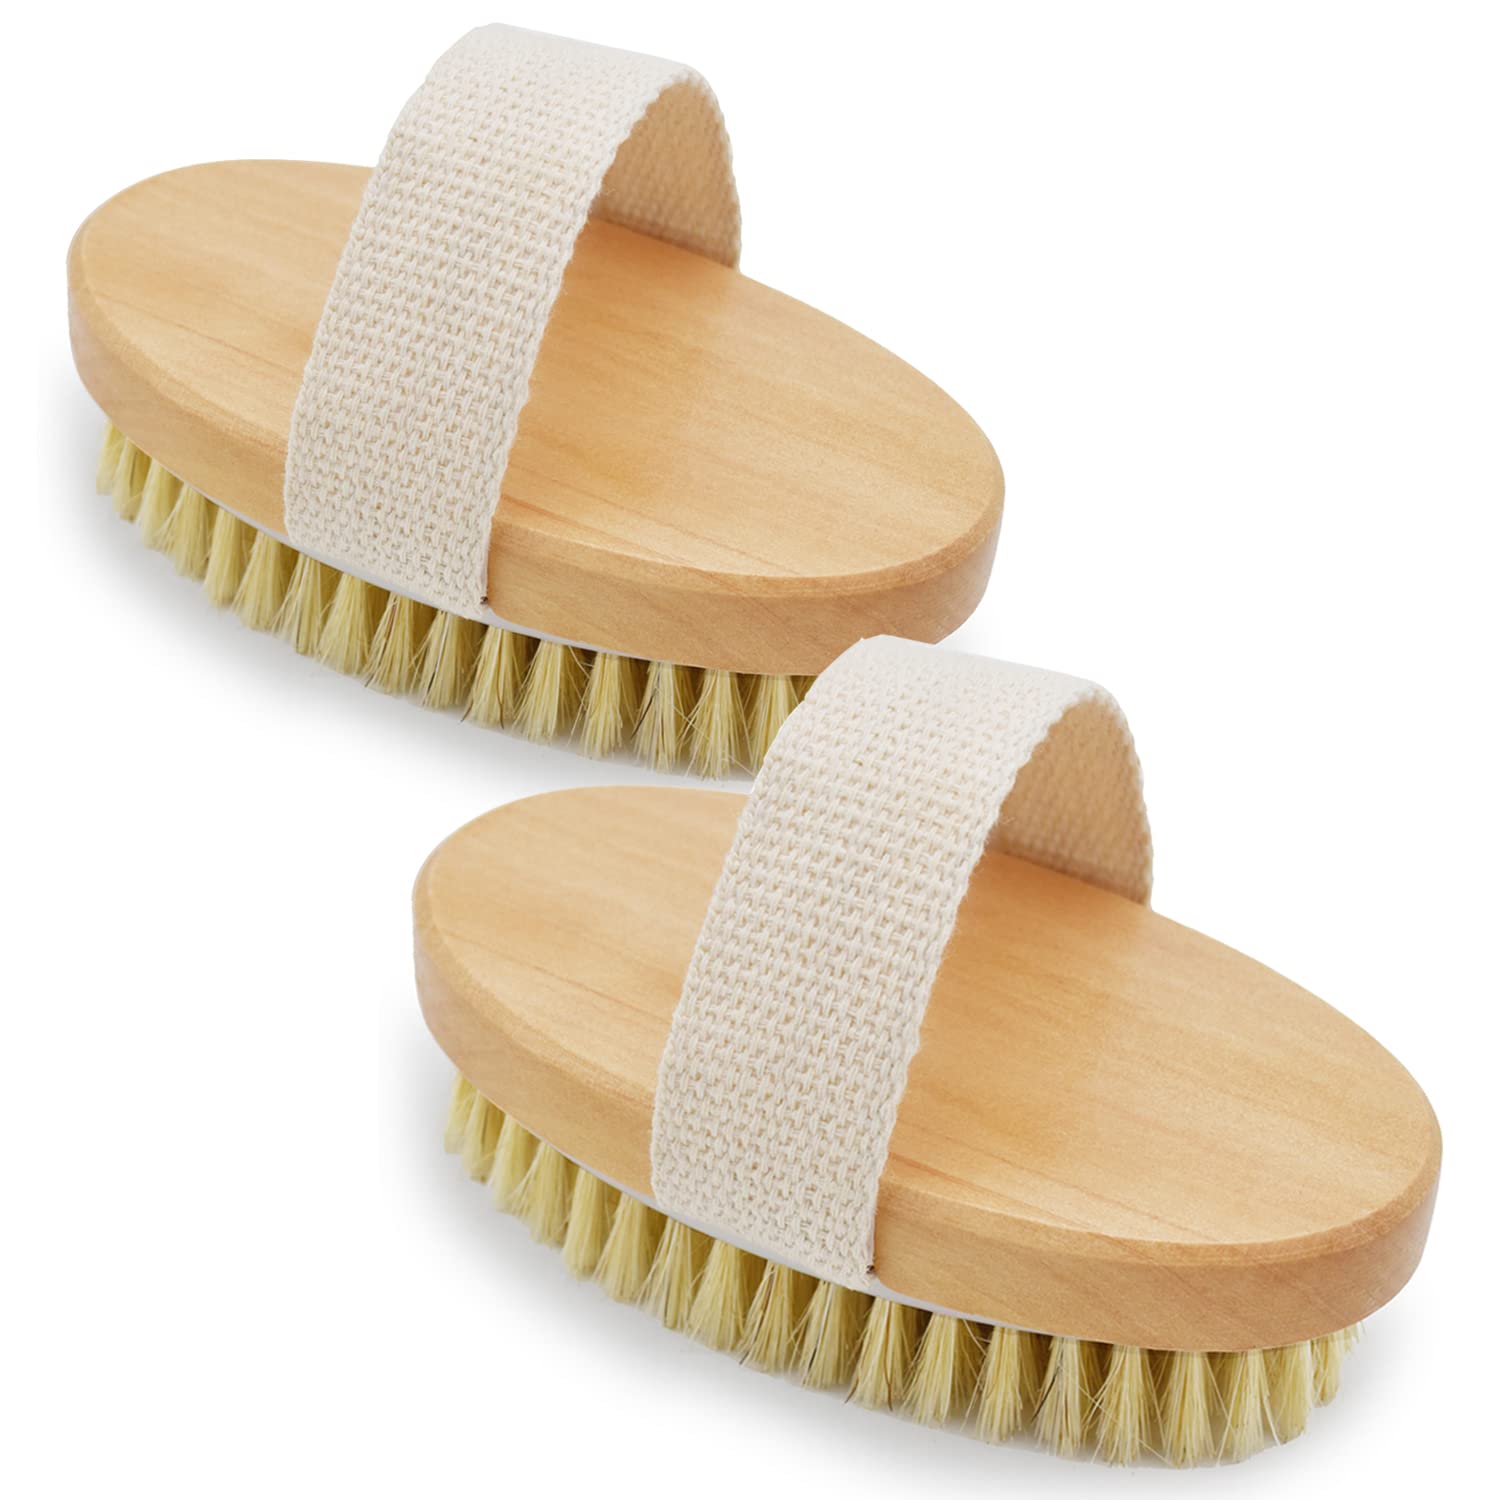  Dry Skin Body Brush - Improves Skin's Health and Beauty -  Natural Bristle - Remove Dead Skin and Toxins, Cellulite Treatment,  Improves Lymphatic Functions, Exfoliates, Stimulates Blood Circulation :  Beauty & Personal Care